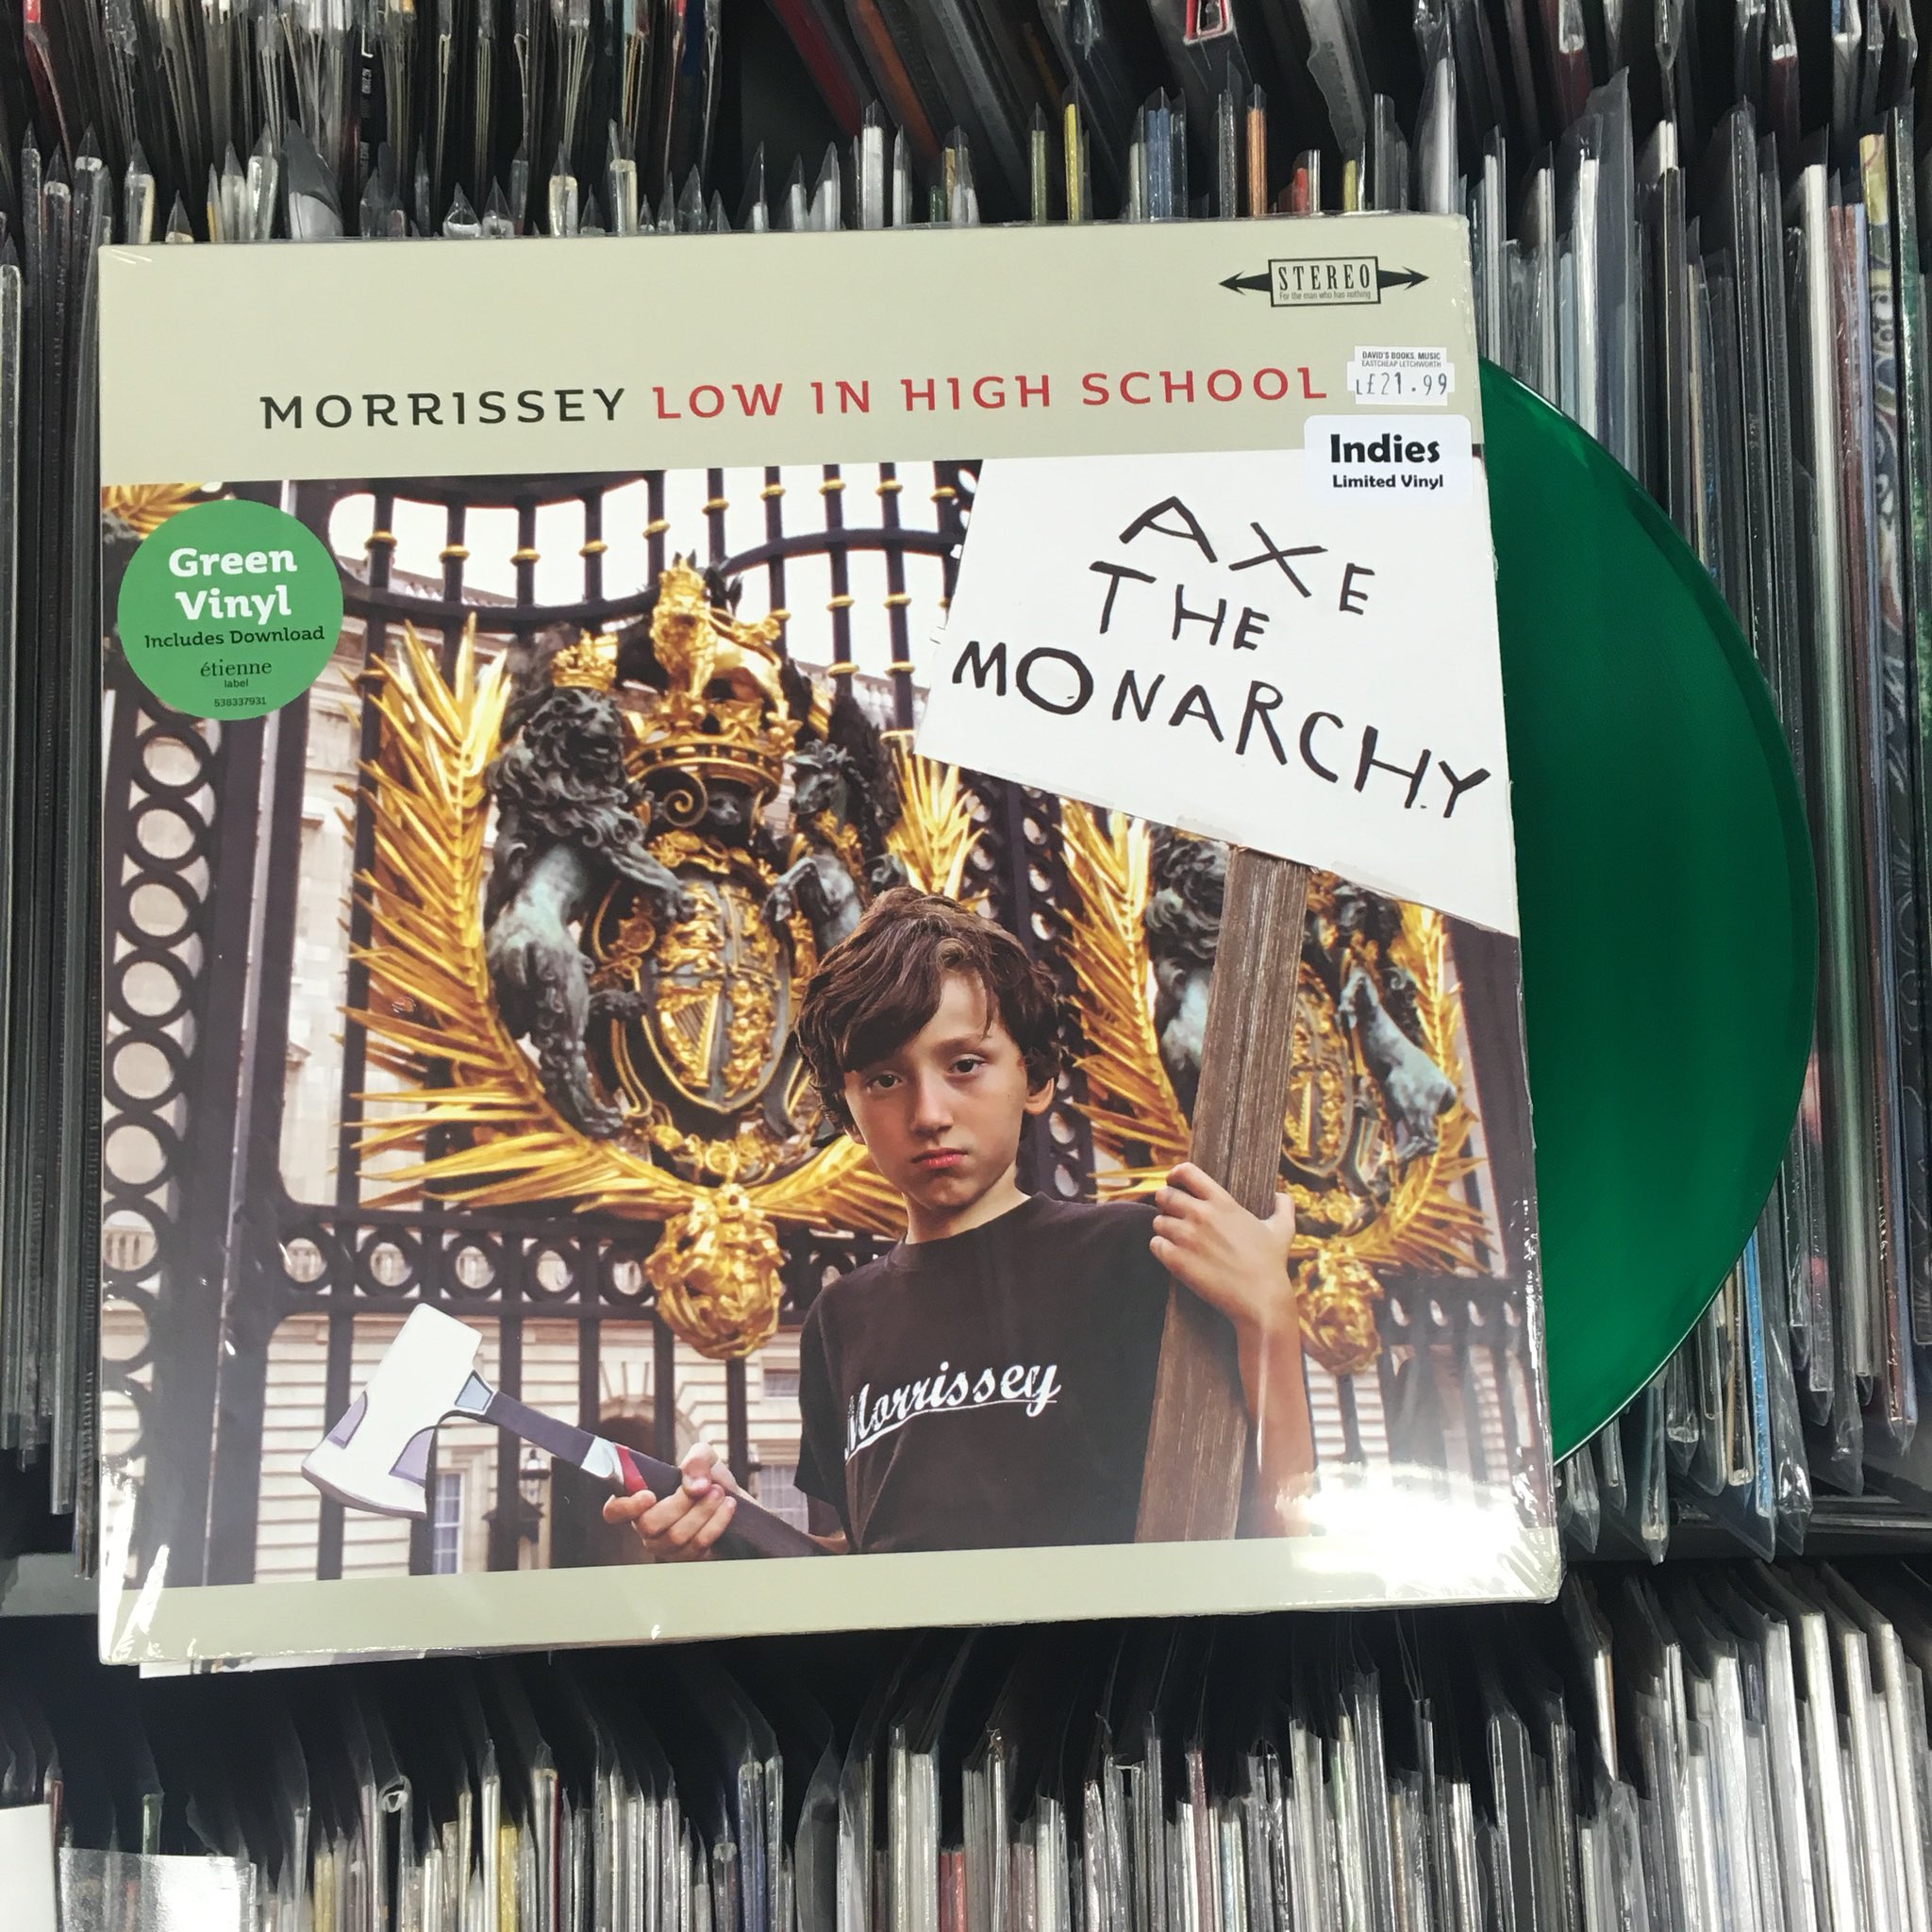 David's Music on "TODAY! Morrissey “Low in High School” - some of Mozza's finest work - CD limited indies GREEN vinyl! @officialmoz @BMGuk # #LowinHighSchool https://t.co/I6dwOr6Txp" / Twitter